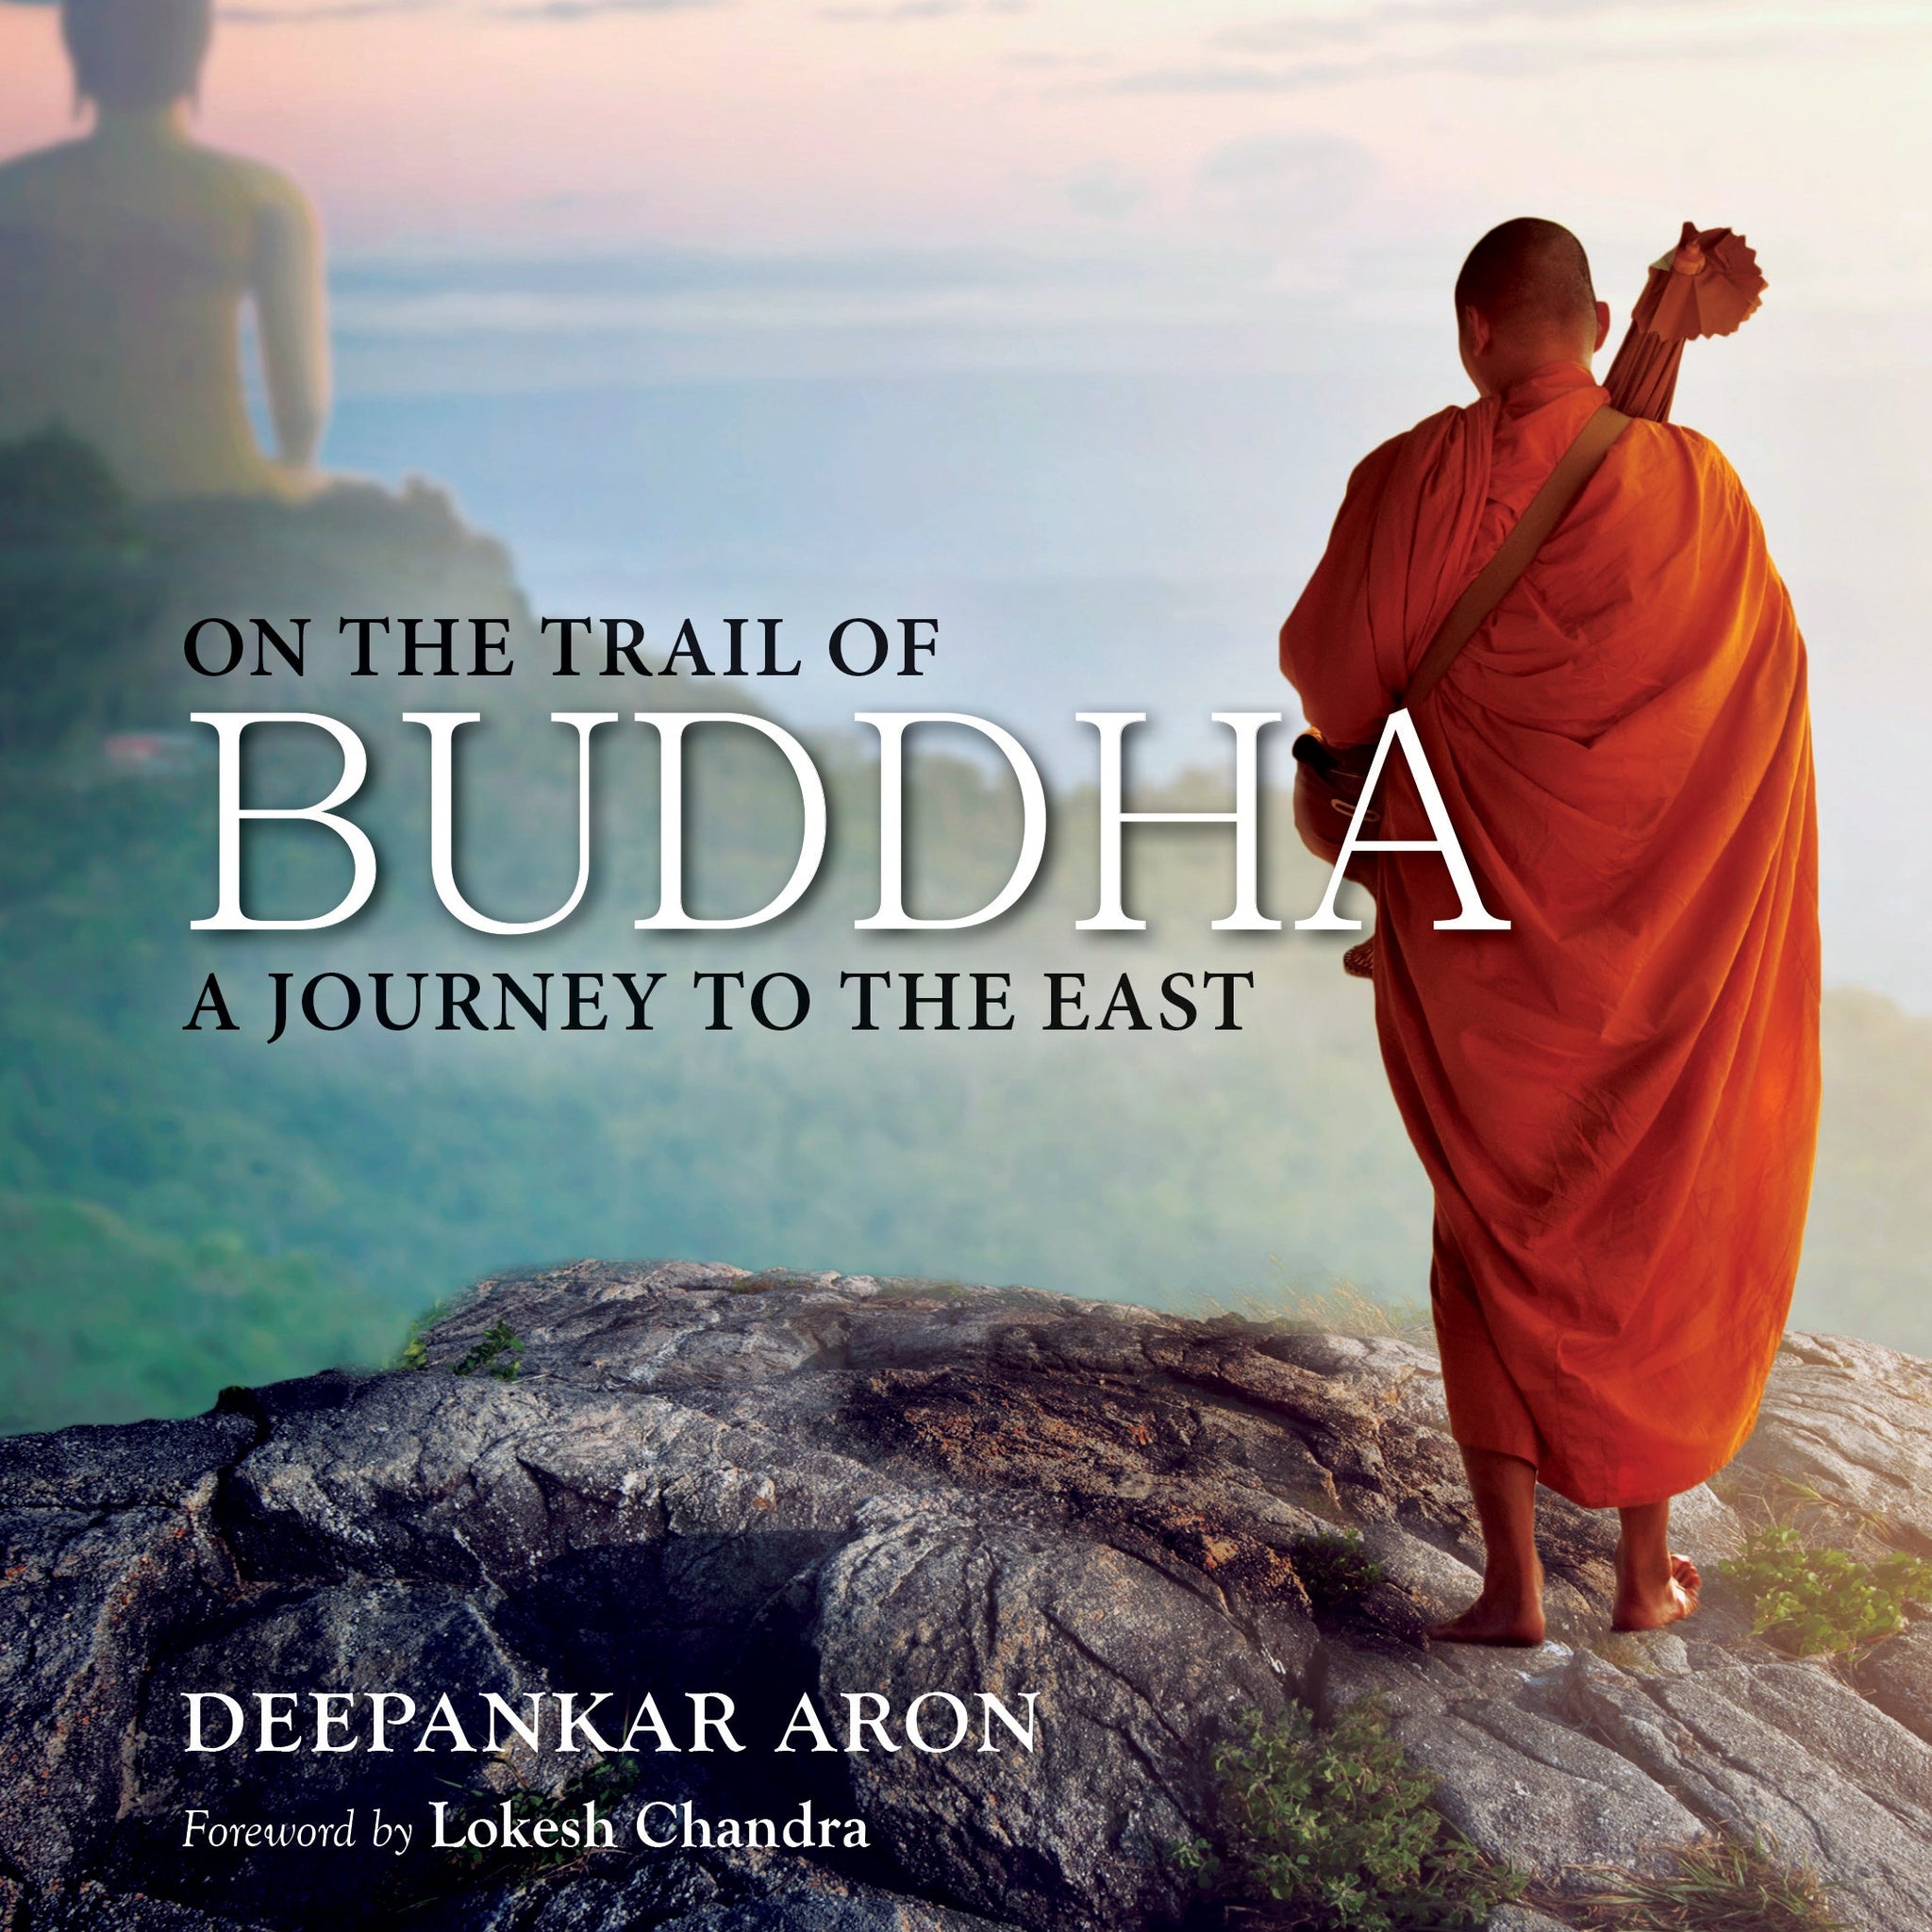 On The Trail of Buddha: A Journey To The East